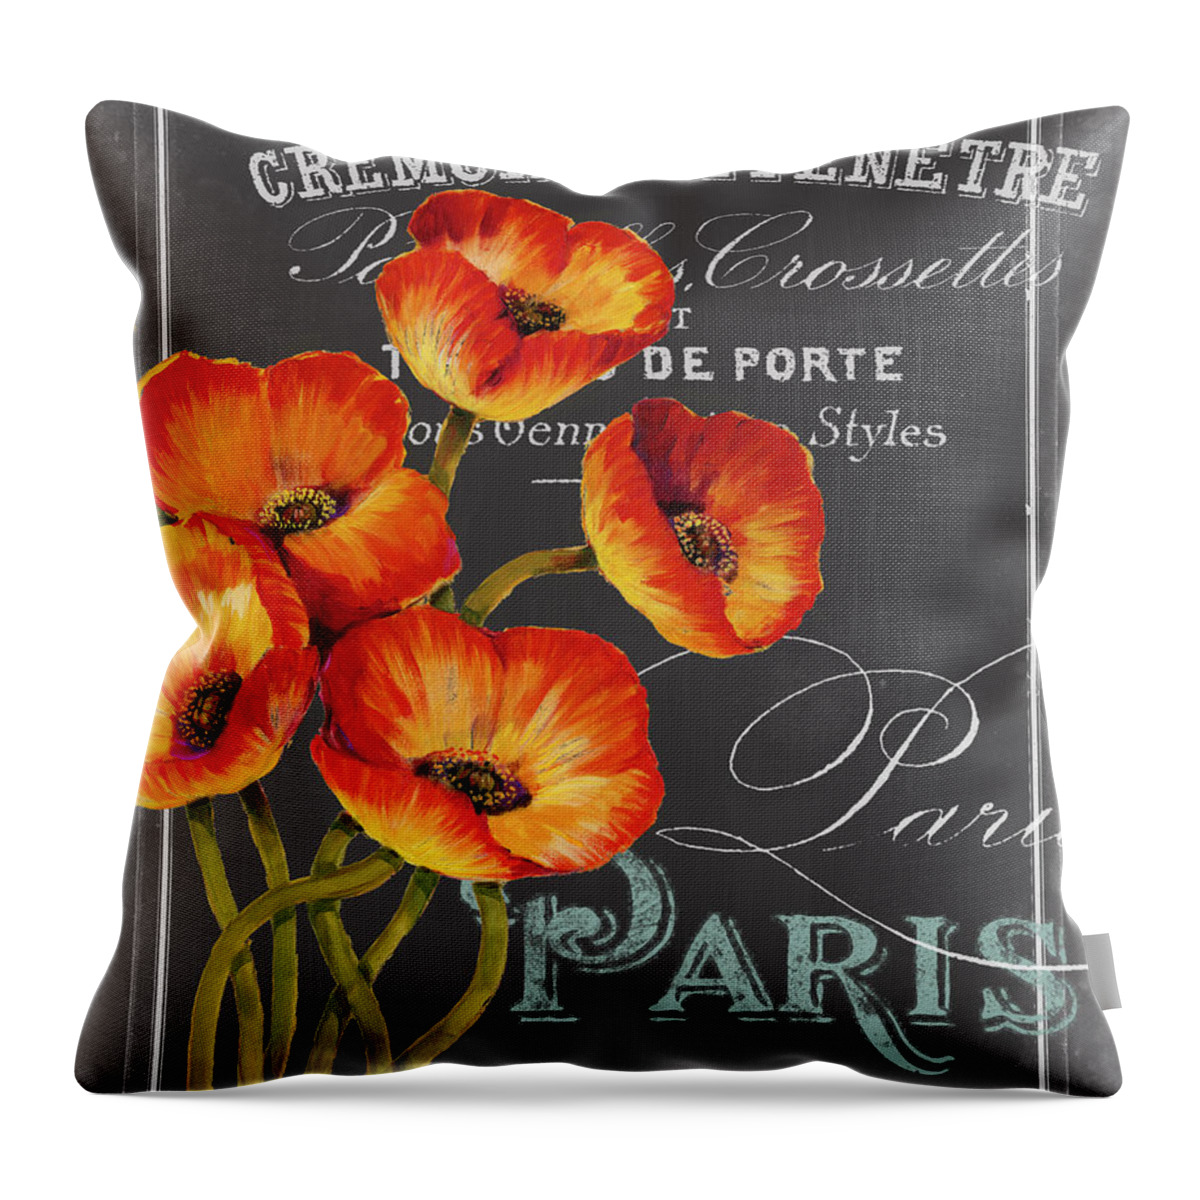 Travel Throw Pillow featuring the painting Chalkboard Paris IIi by Studio W